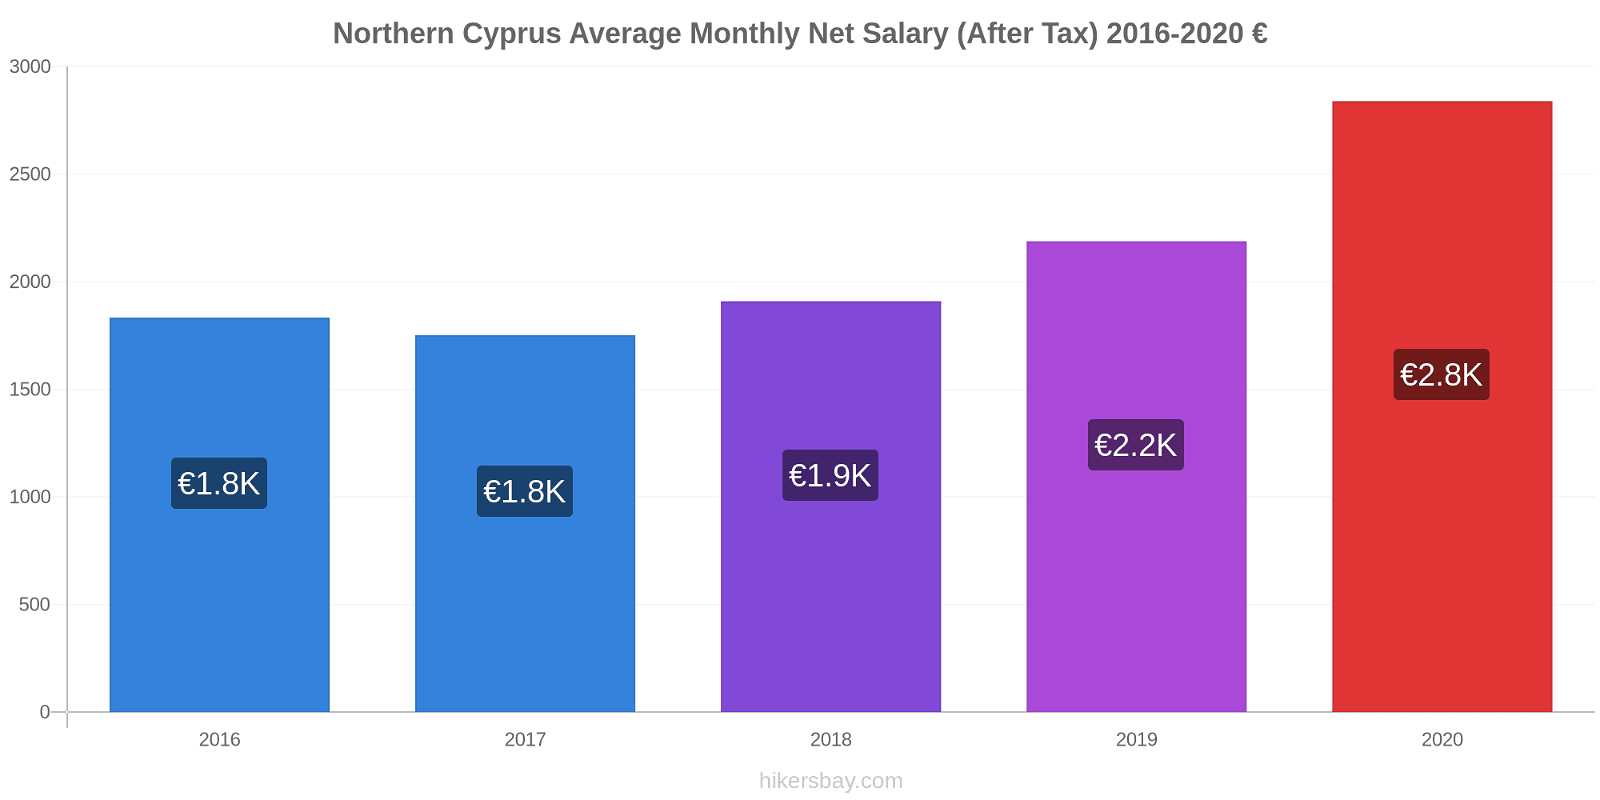 Northern Cyprus price changes Average Monthly Net Salary (After Tax) hikersbay.com